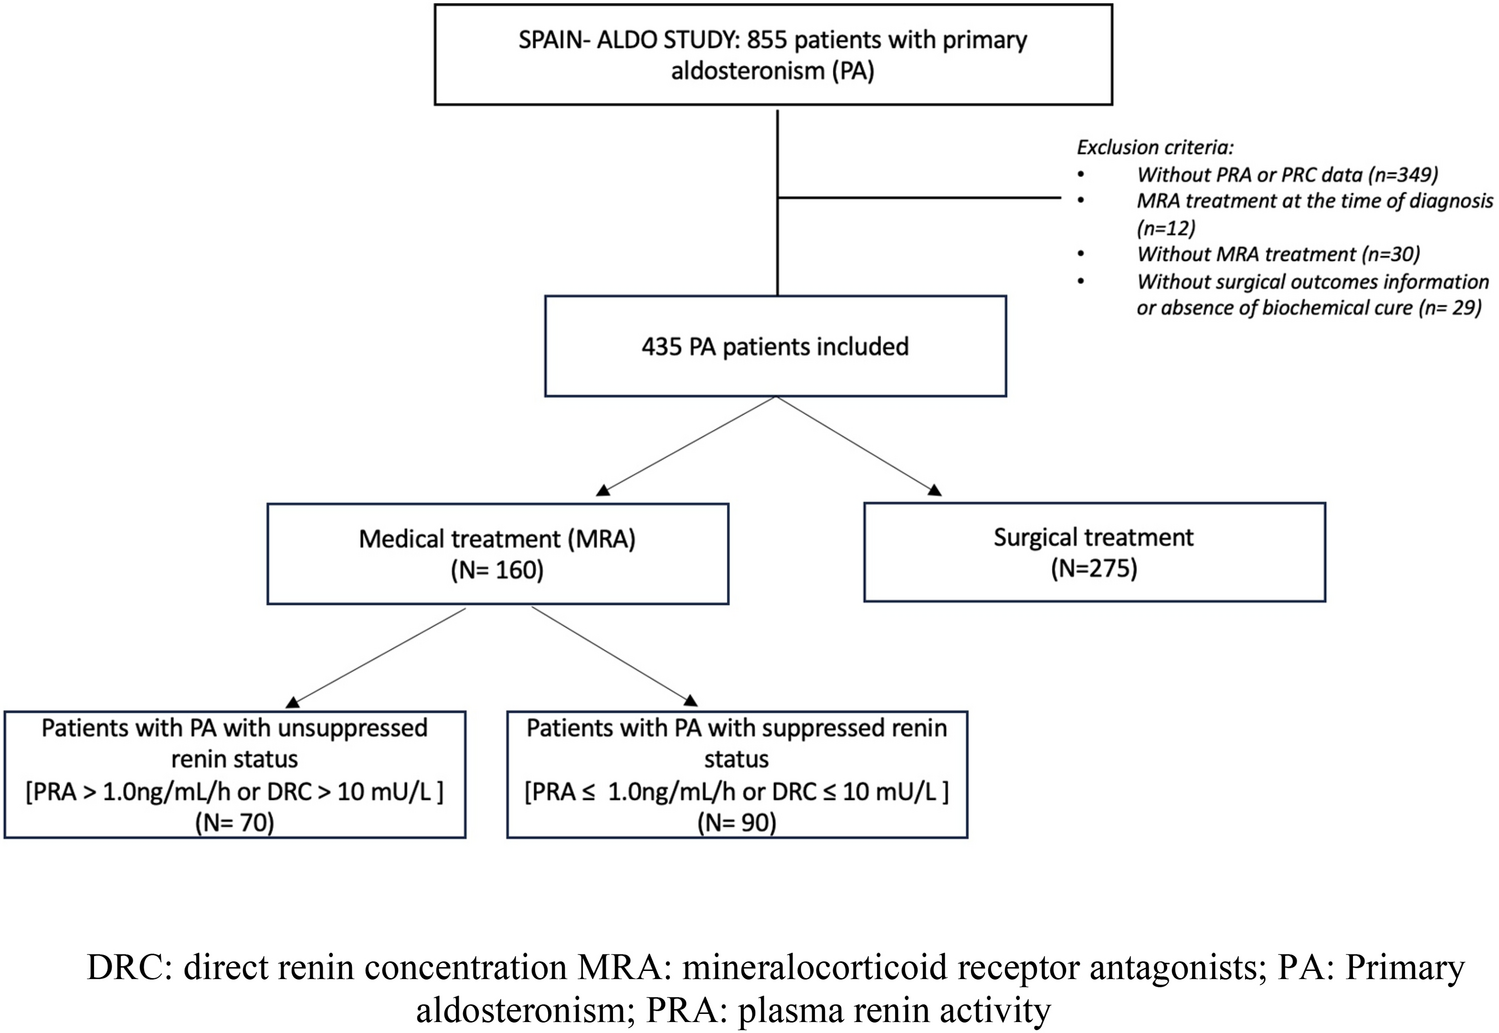 Renin as a Biomarker to Guide Medical Treatment in Primary Aldosteronism Patients. Findings from the SPAIN-ALDO Registry